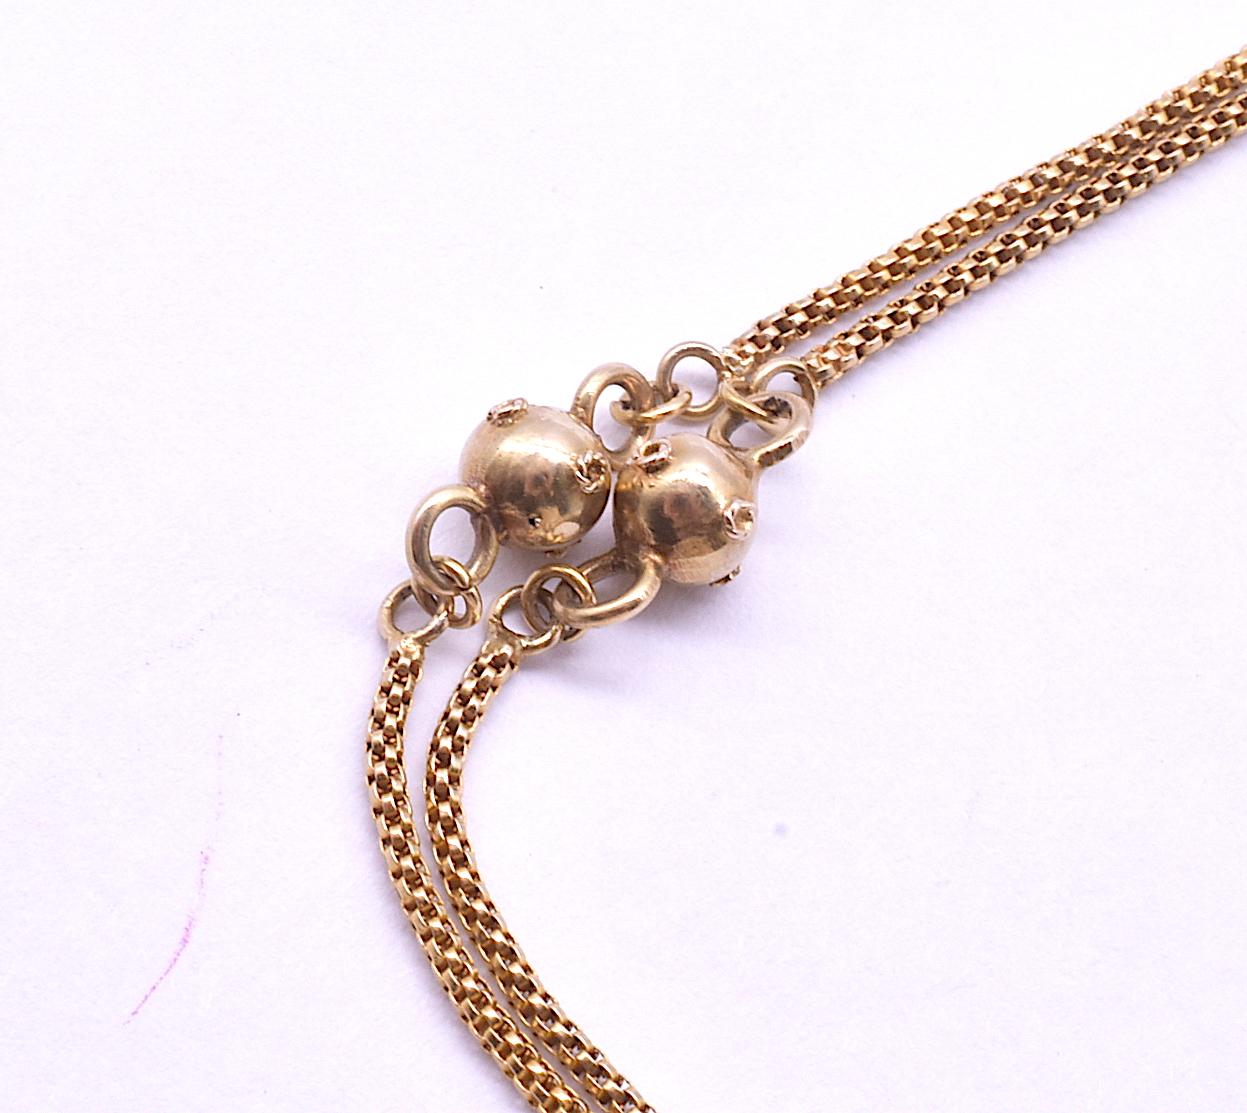 Women's Victorian 15k Rope Chain with Decorative Gold Balls